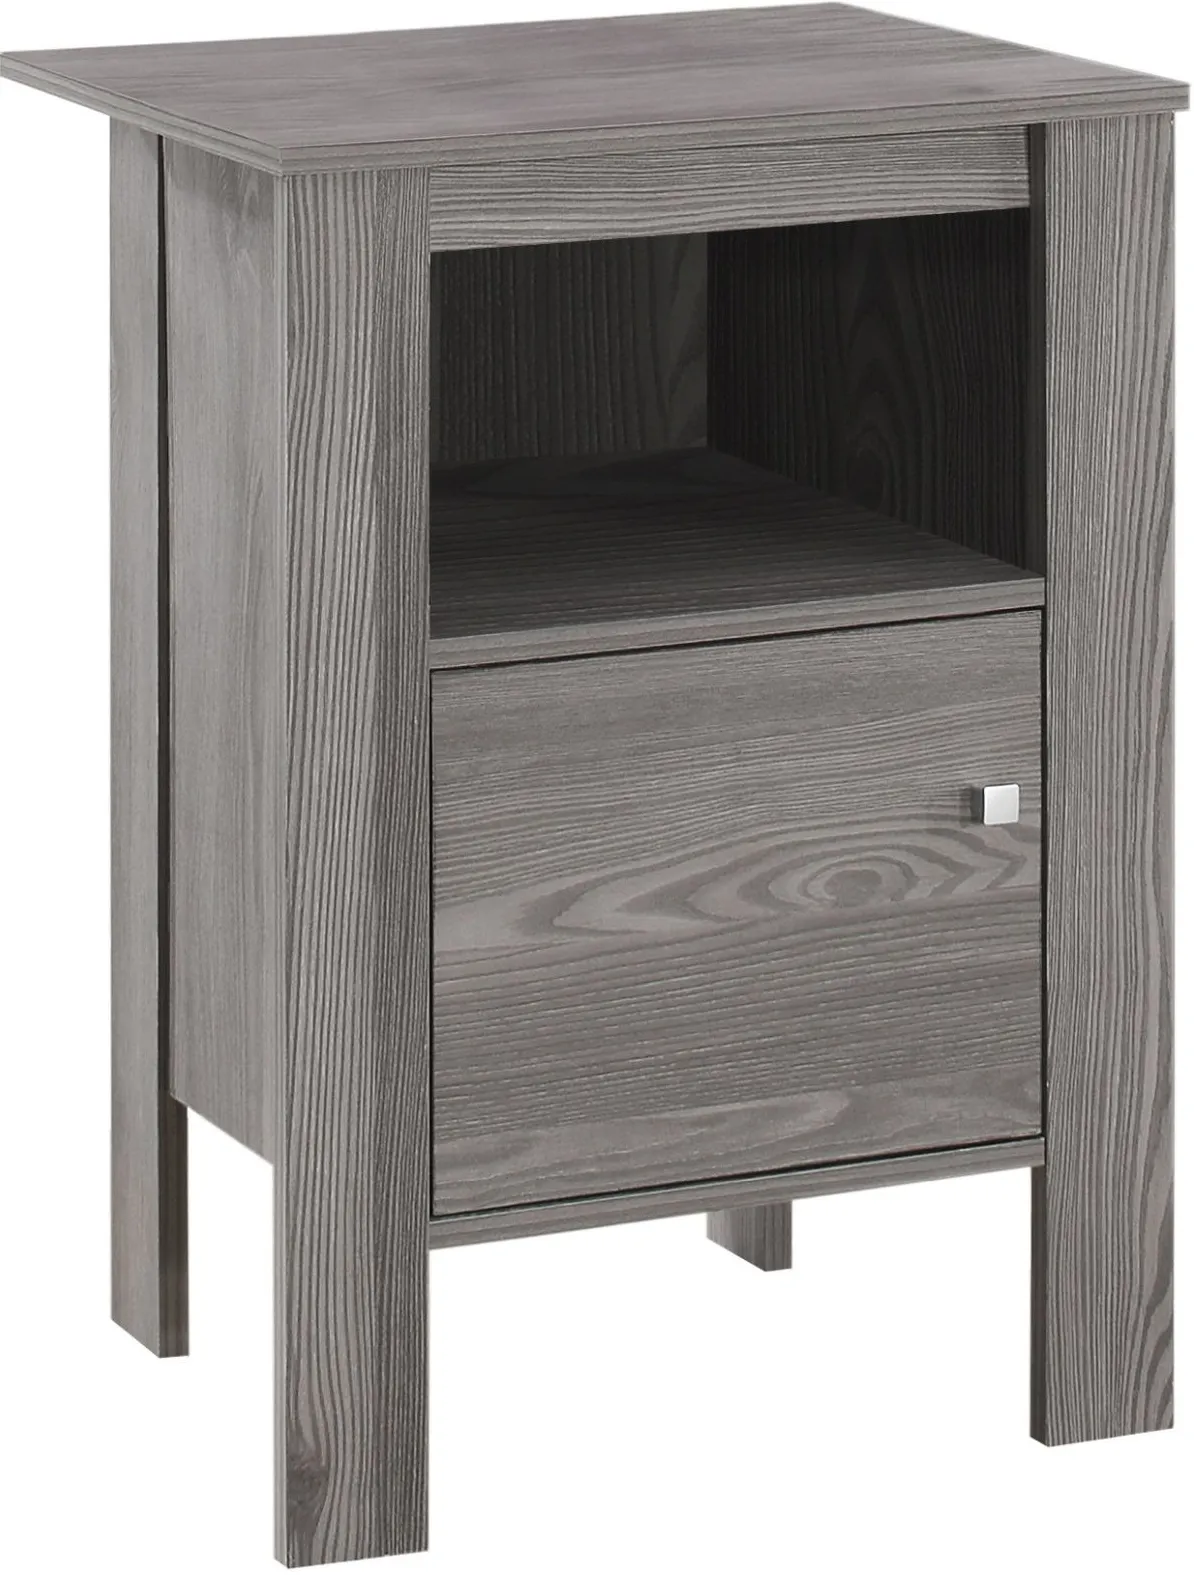 Accent Table, Side, End, Nightstand, Lamp, Storage, Living Room, Bedroom, Laminate, Grey, Transitional